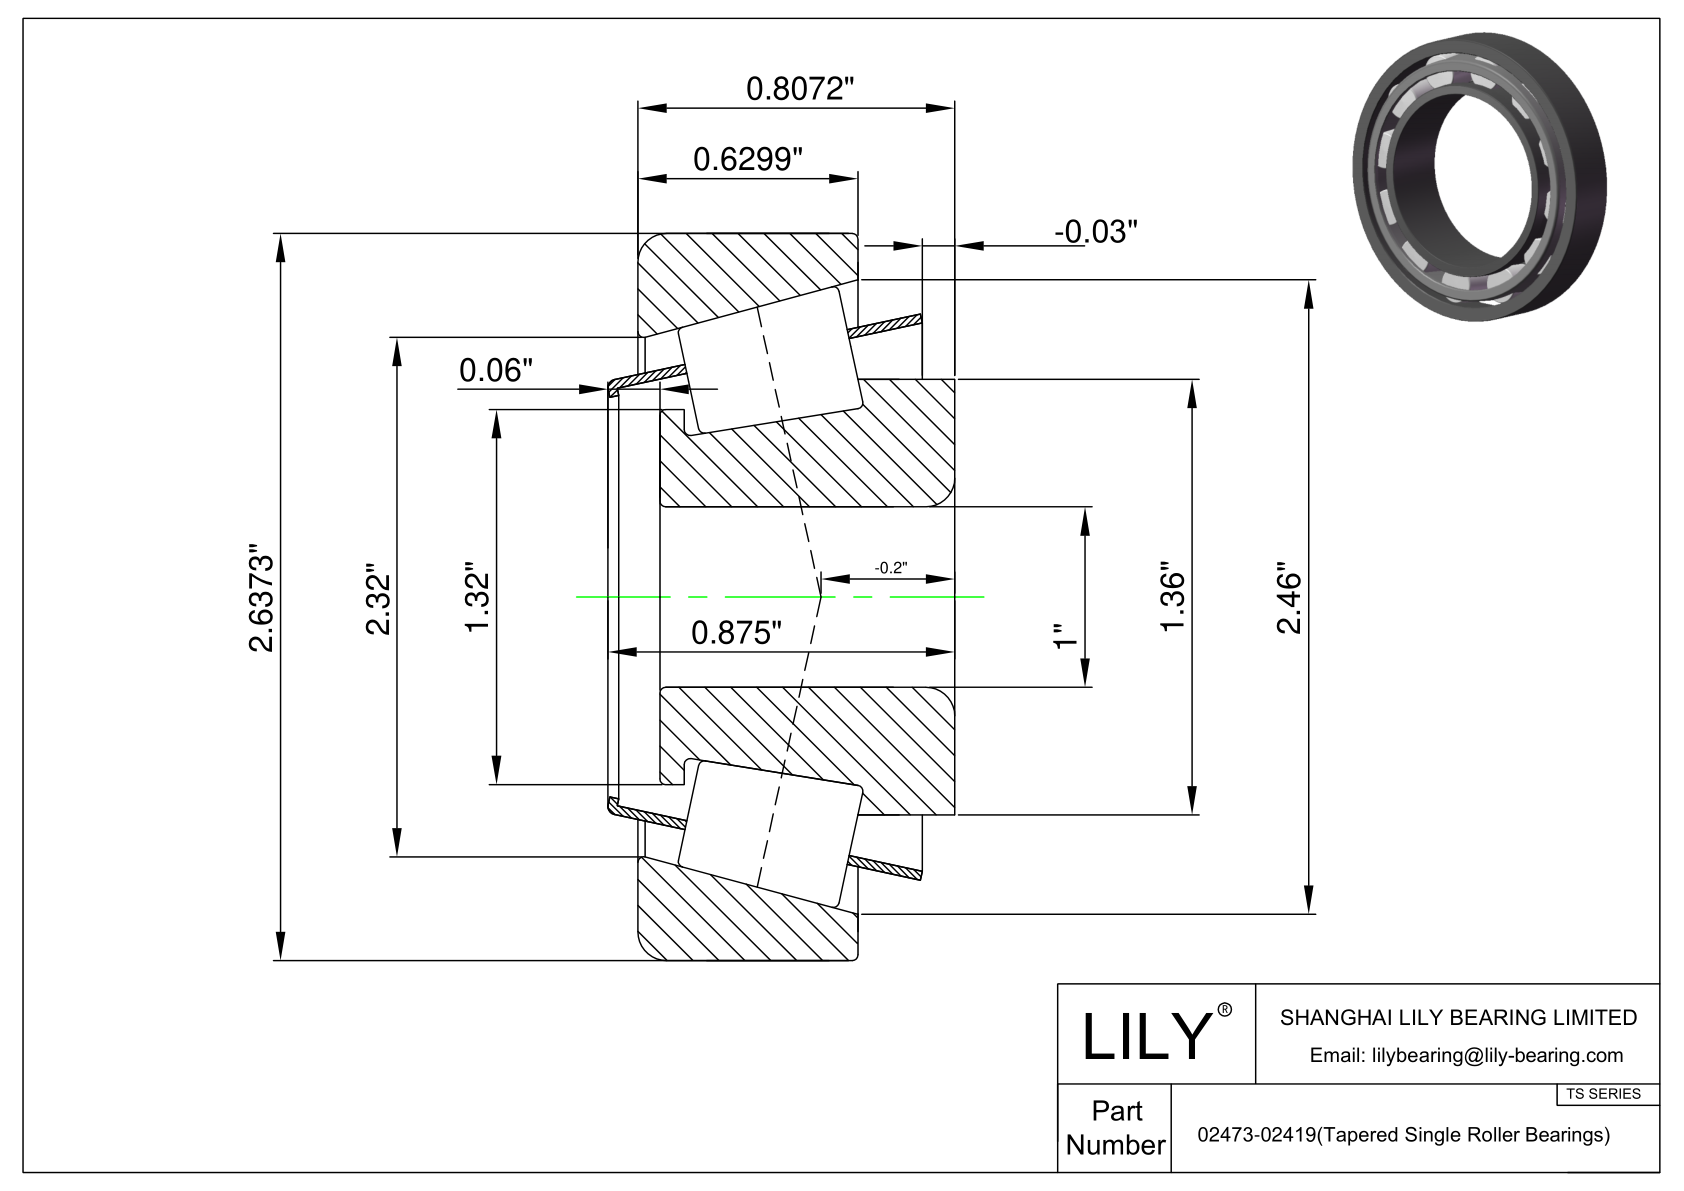 02473-02419 TS (Tapered Single Roller Bearings) (Imperial) cad drawing